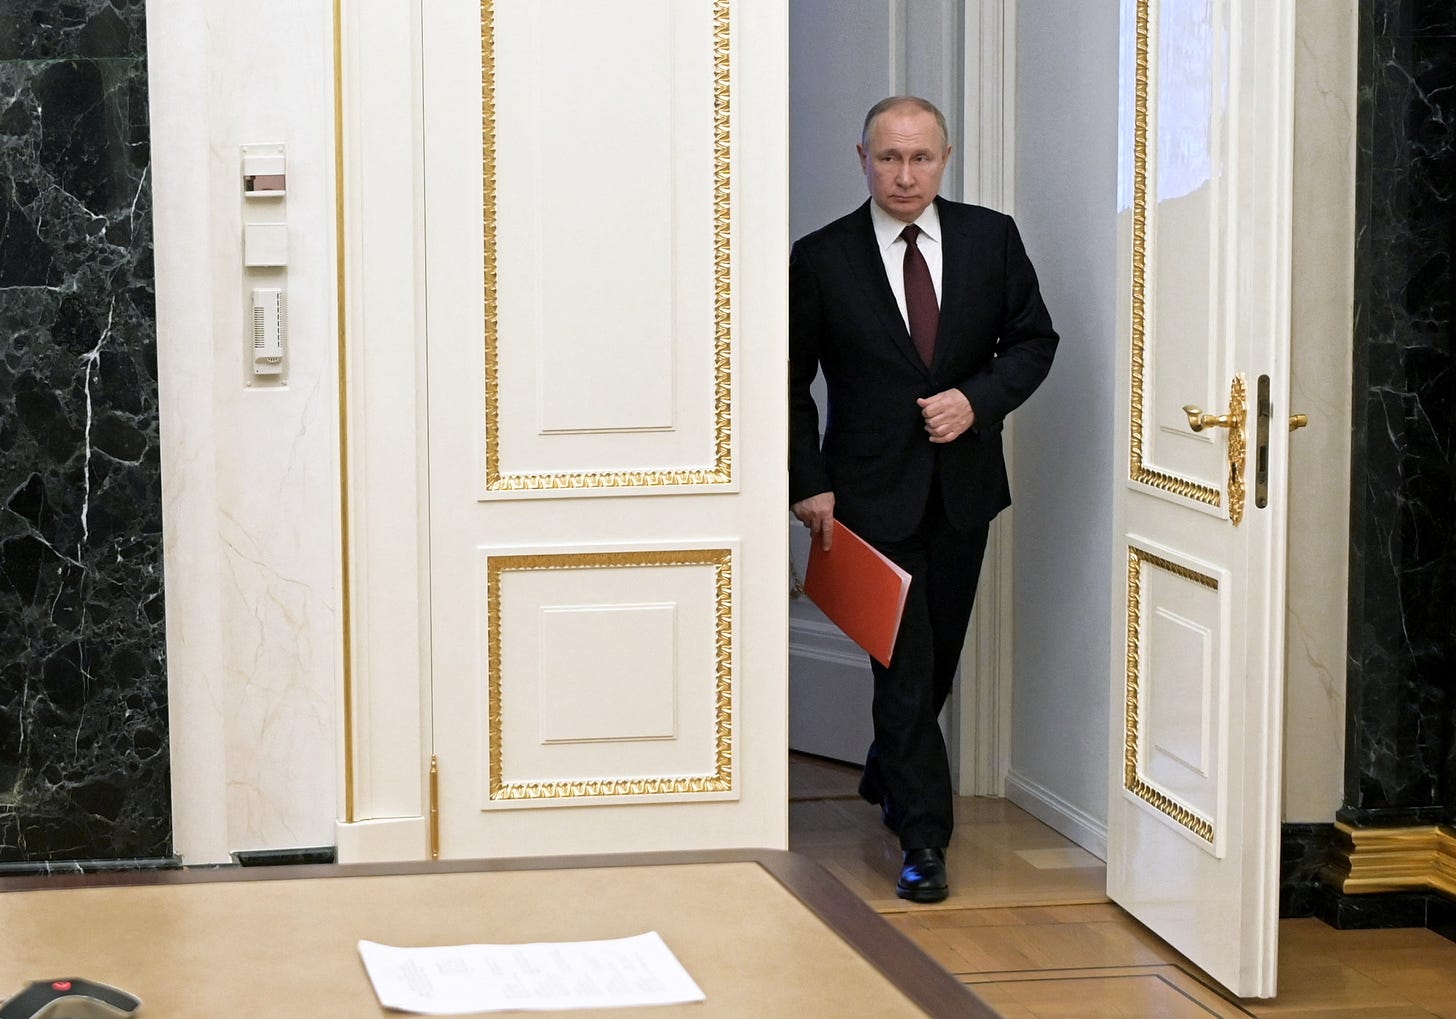 Russian President Vladimir Putin enters a hall before a meeting with members of the Security Council via a video link in Moscow, Russia February 25, 2022. Sputnik/Alexey Nikolsky/Kremlin